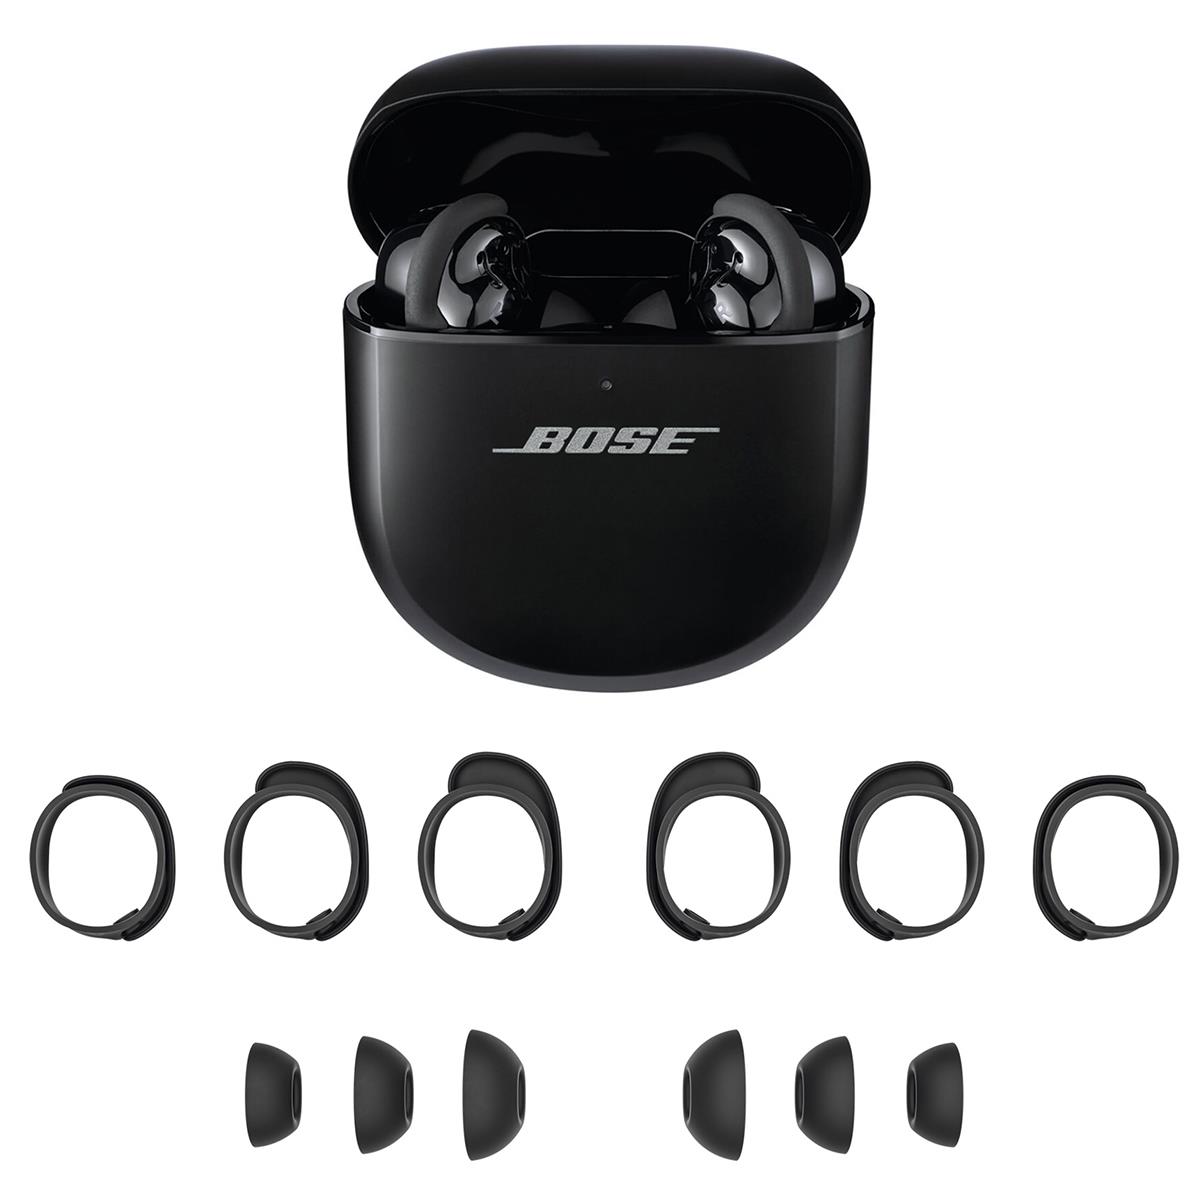 Bose QuietComfort Ultra Wireless Noise Cancelling Earbuds, Black, Bundle with Fit Kit -  882826-0010-K1